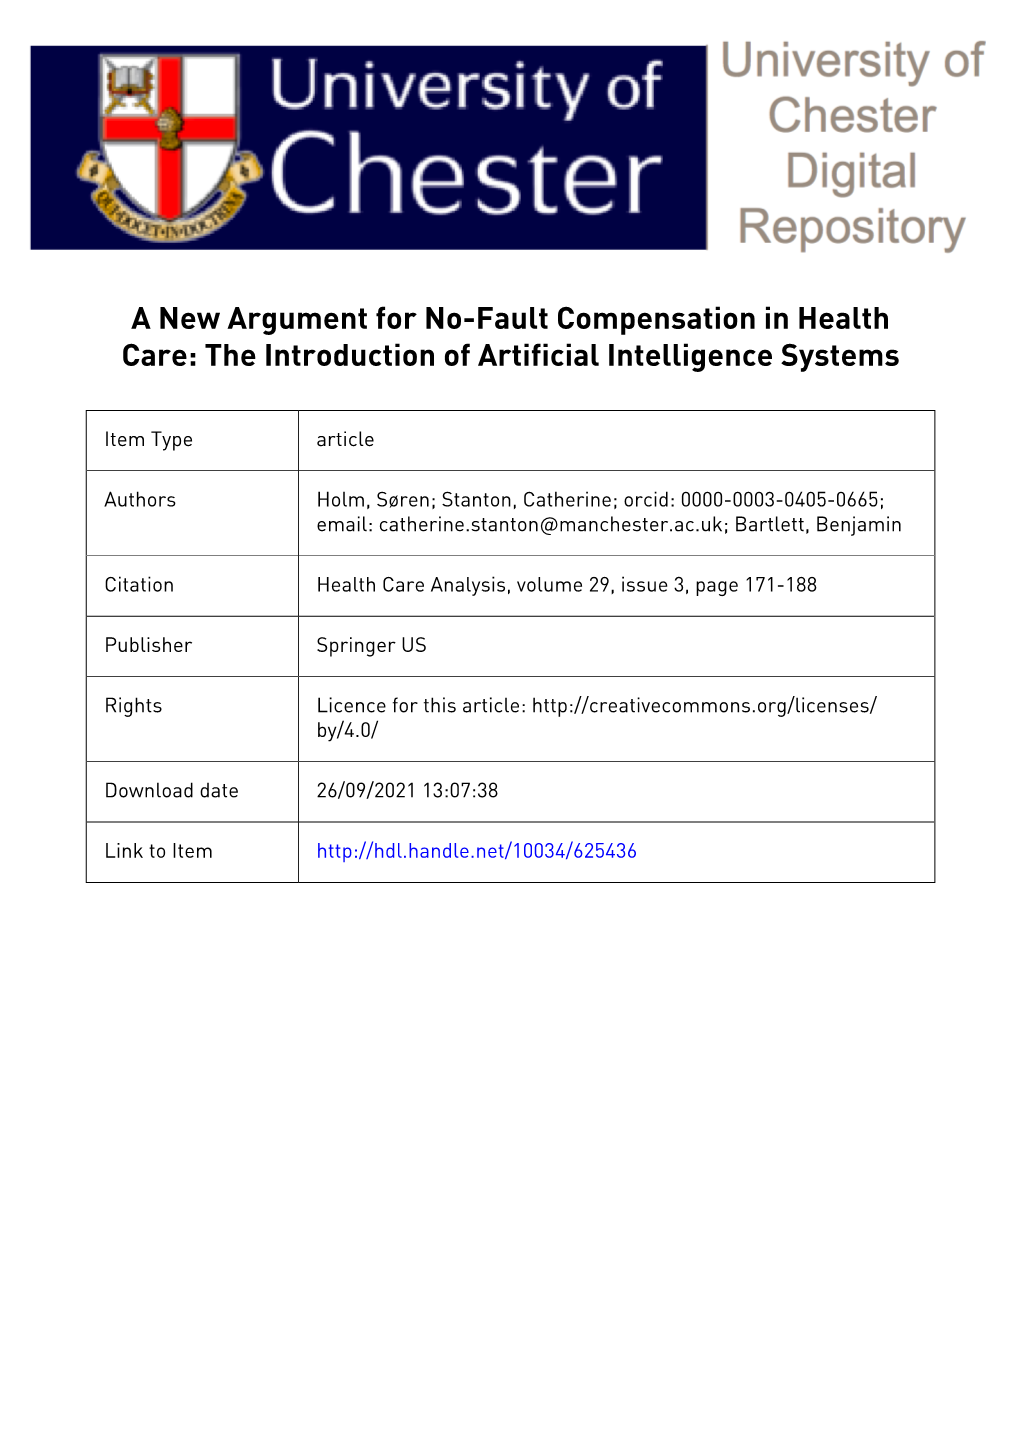 A New Argument for No-Fault Compensation in Health Care: the Introduction of Artificial Intelligence Systems